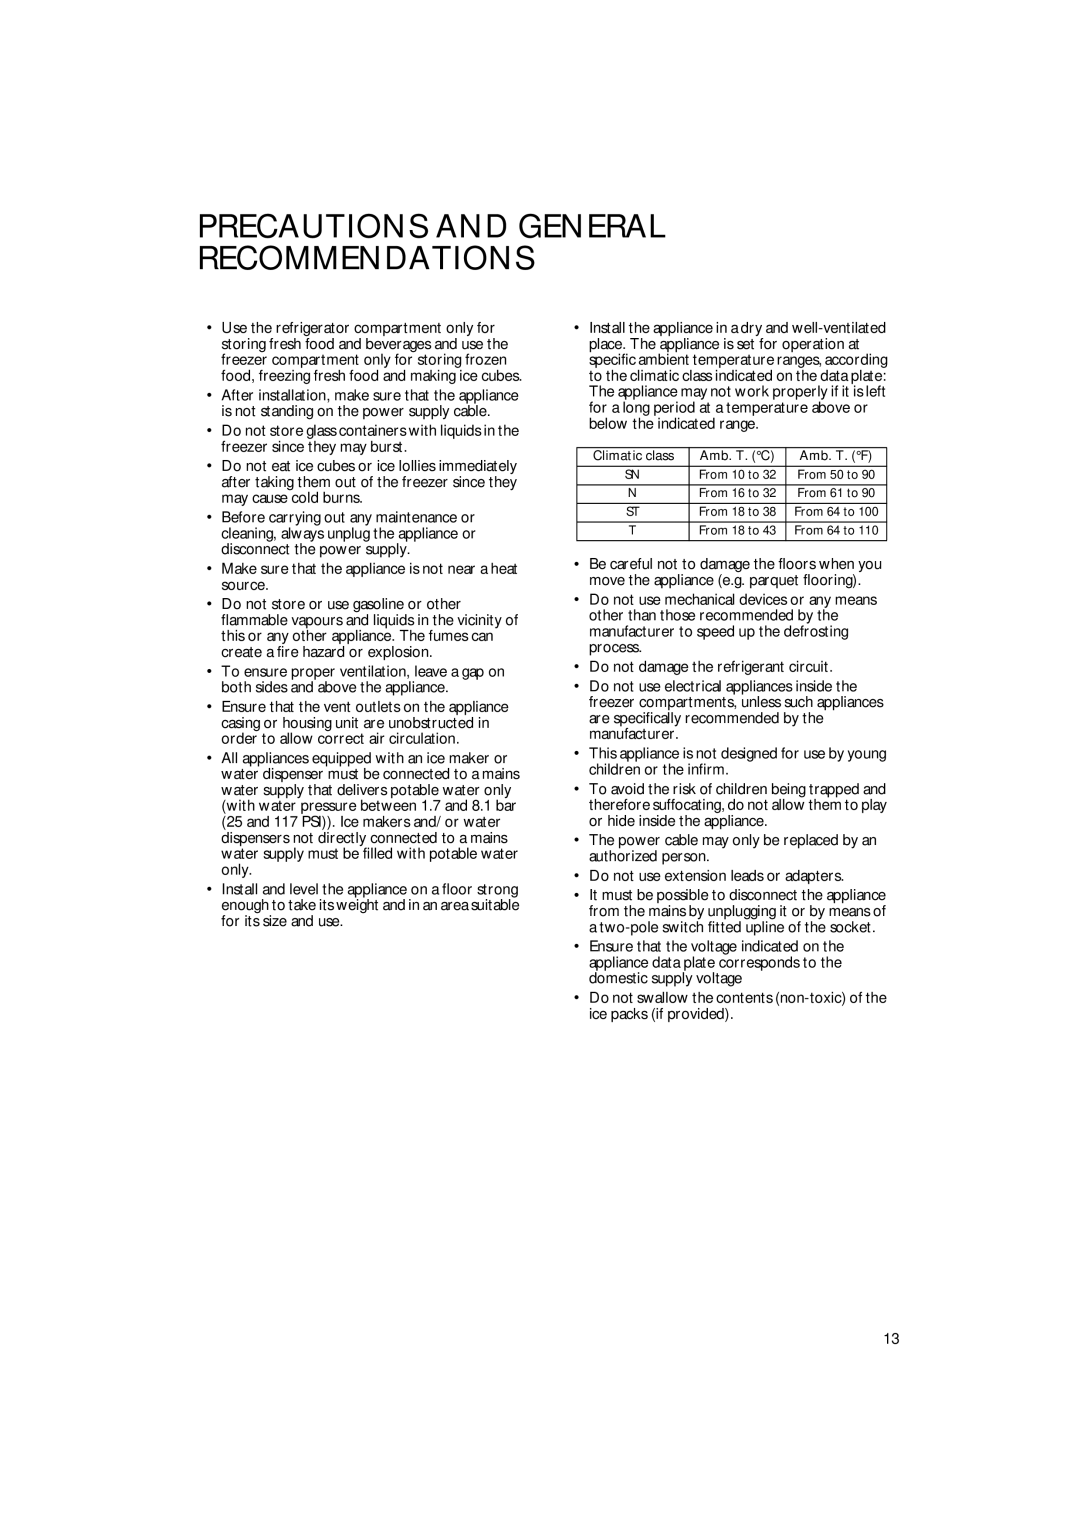 Smeg VR115A manual Precautions And General Recommendations, Do not damage the refrigerant circuit 